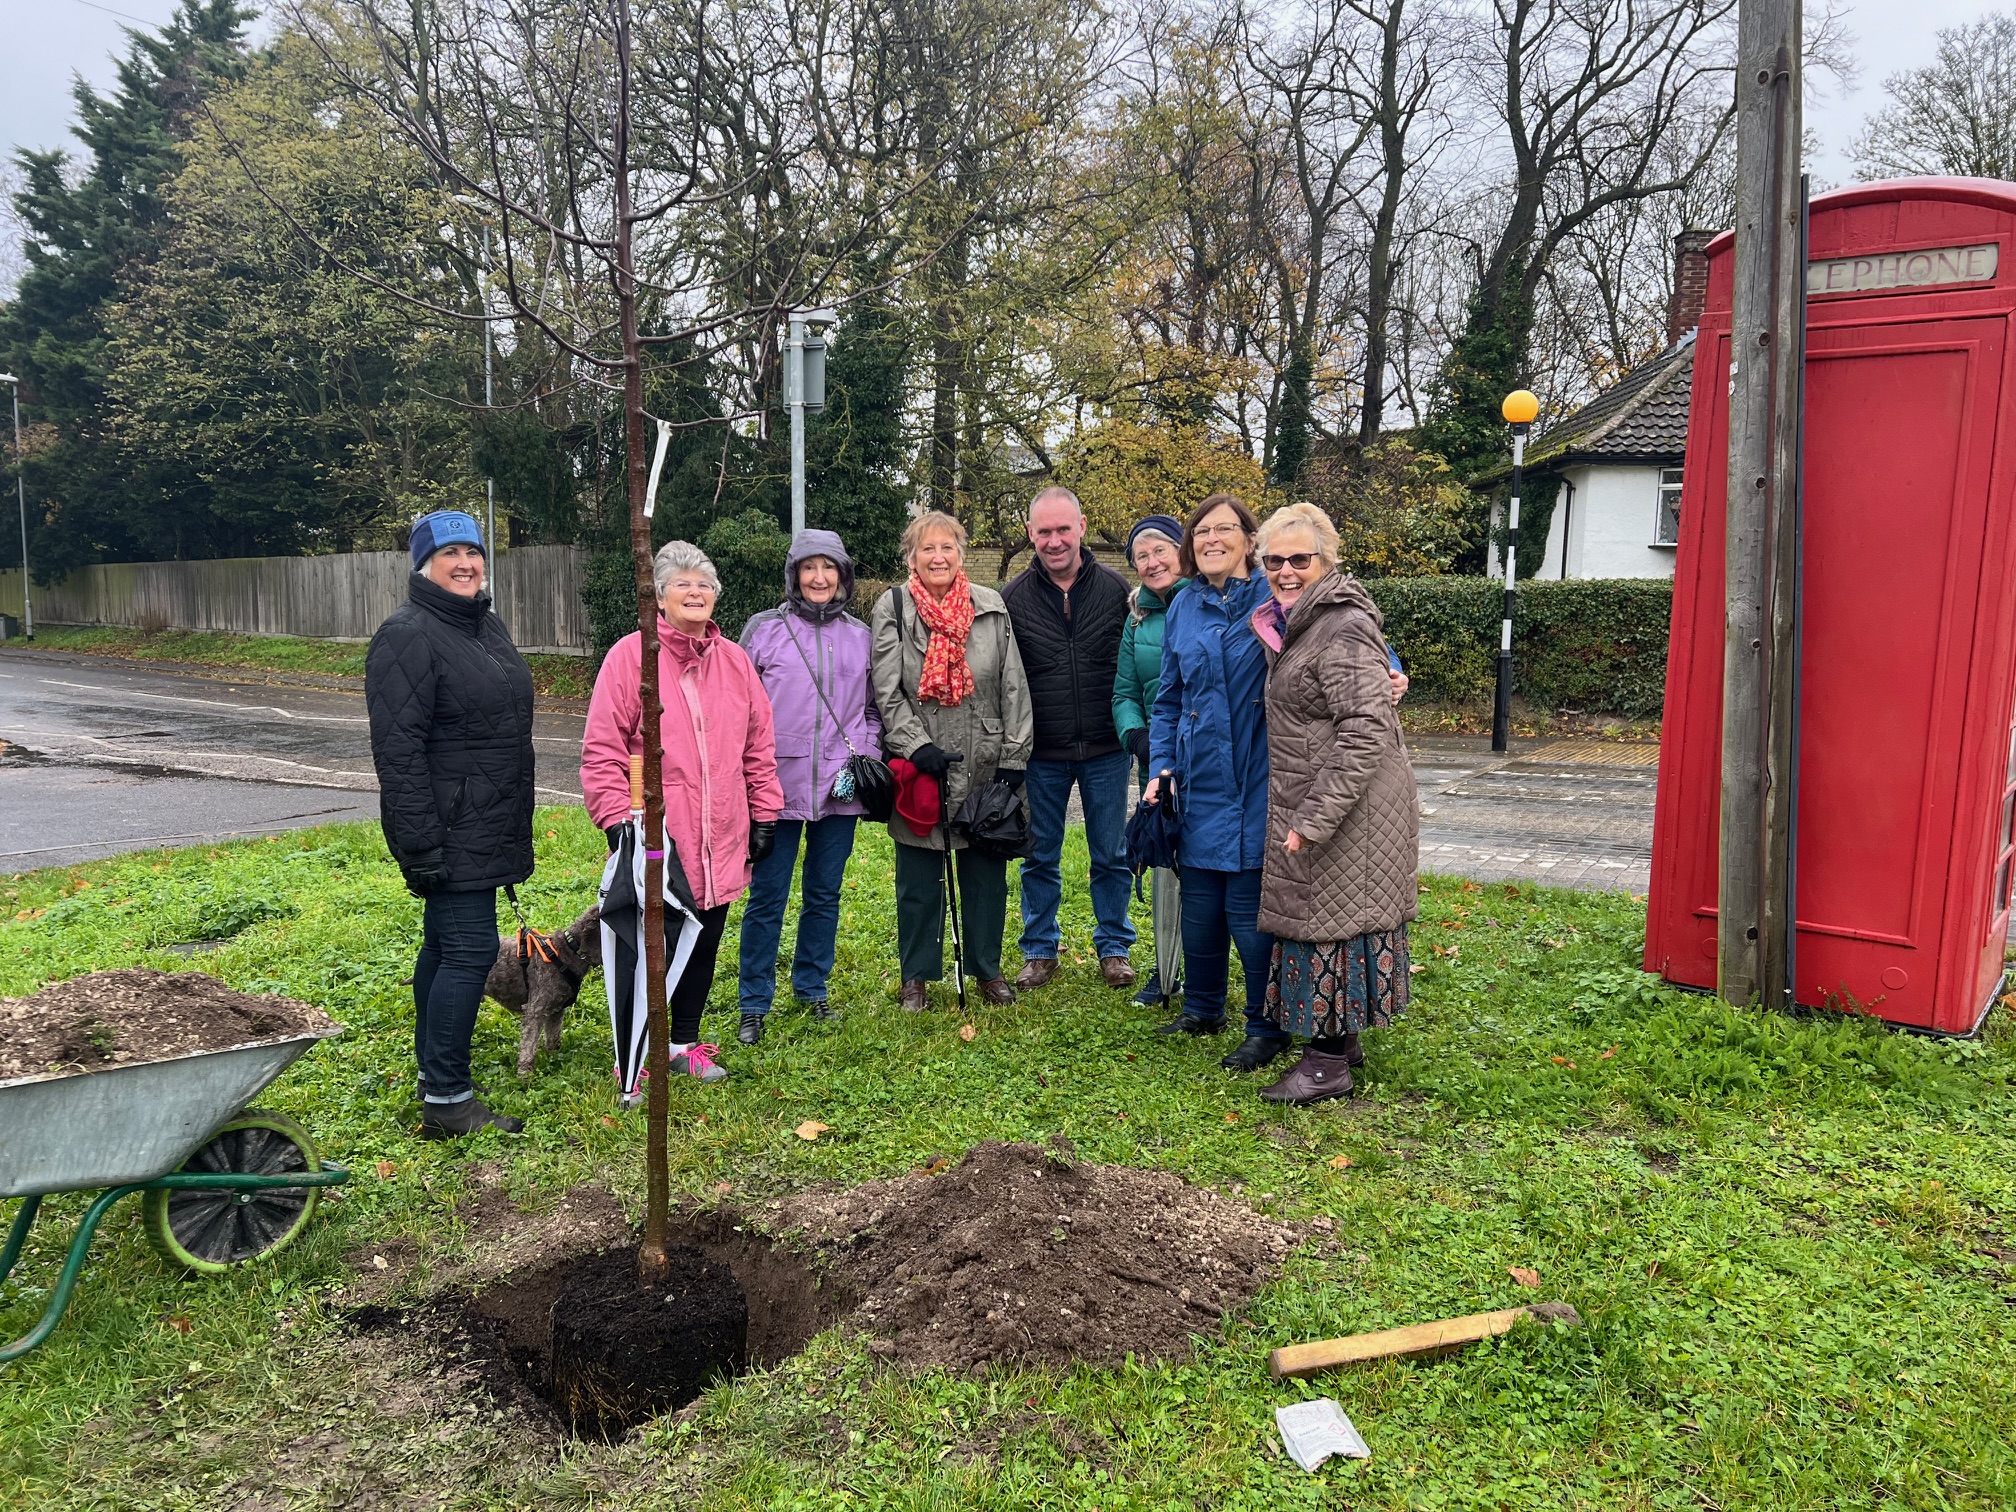 New Tree Planted on Pound Hill